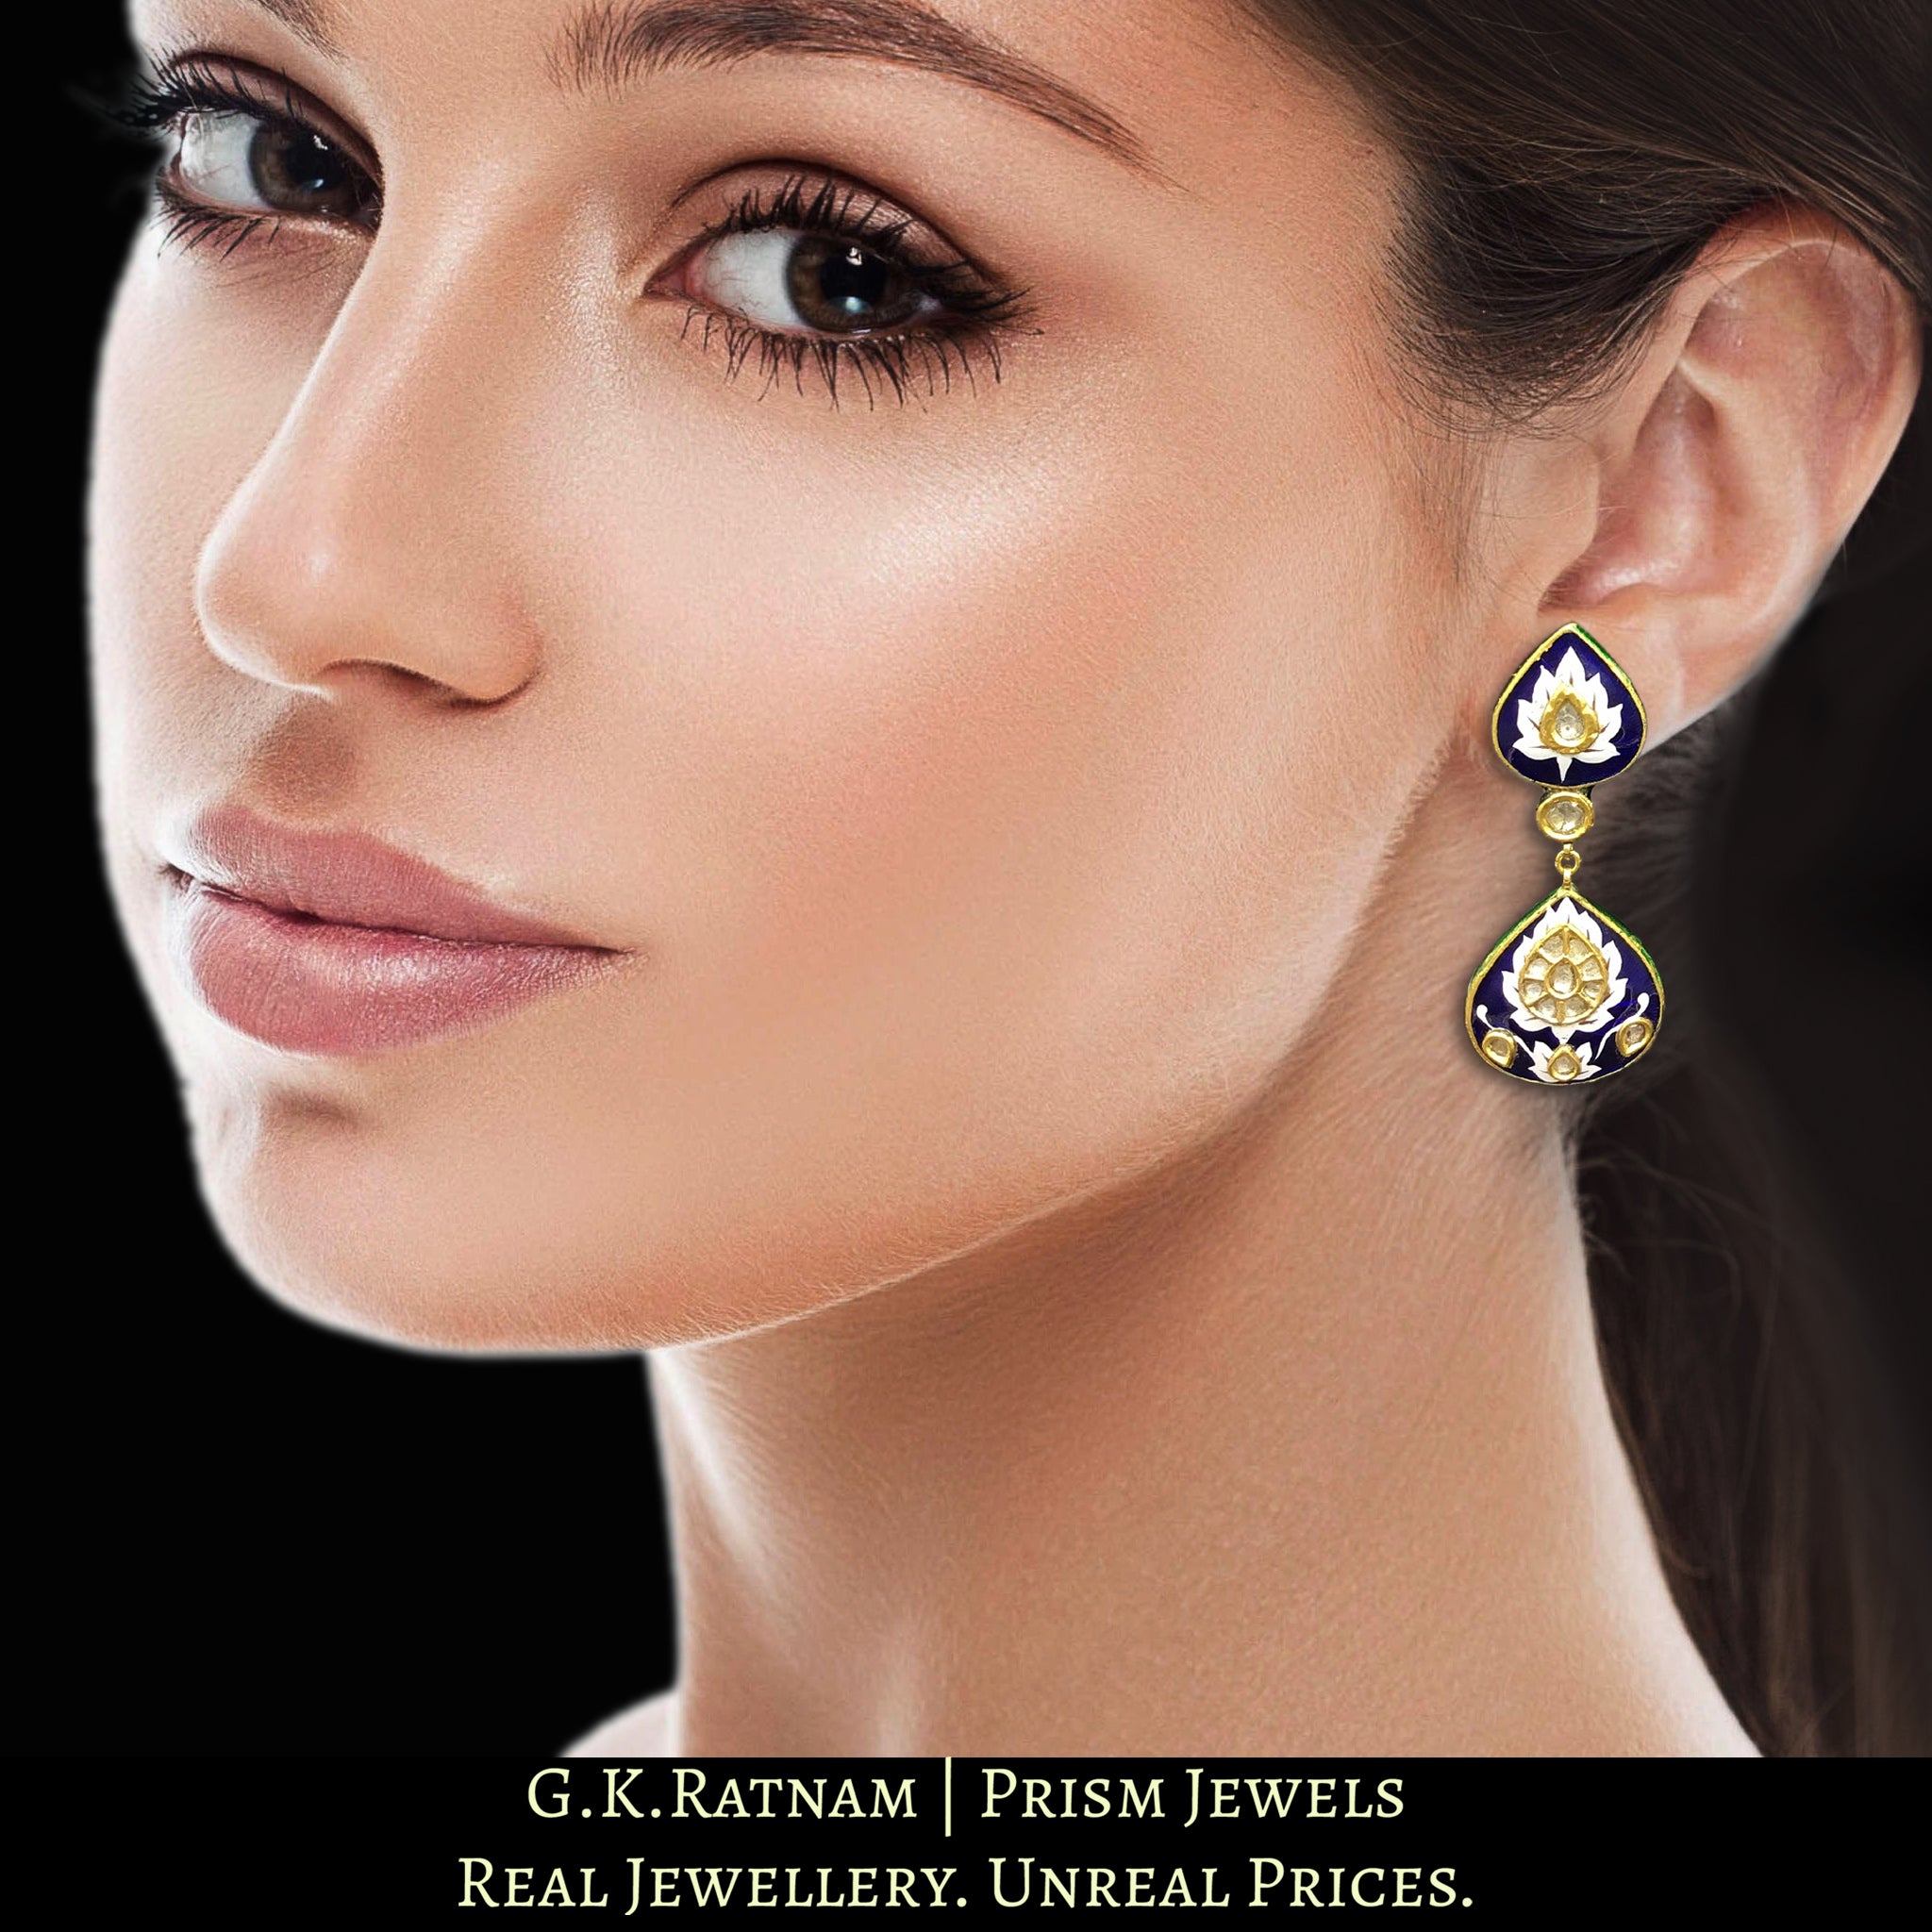 23k Gold and Diamond Polki Long Earring Pair with soothing blue and white enamel